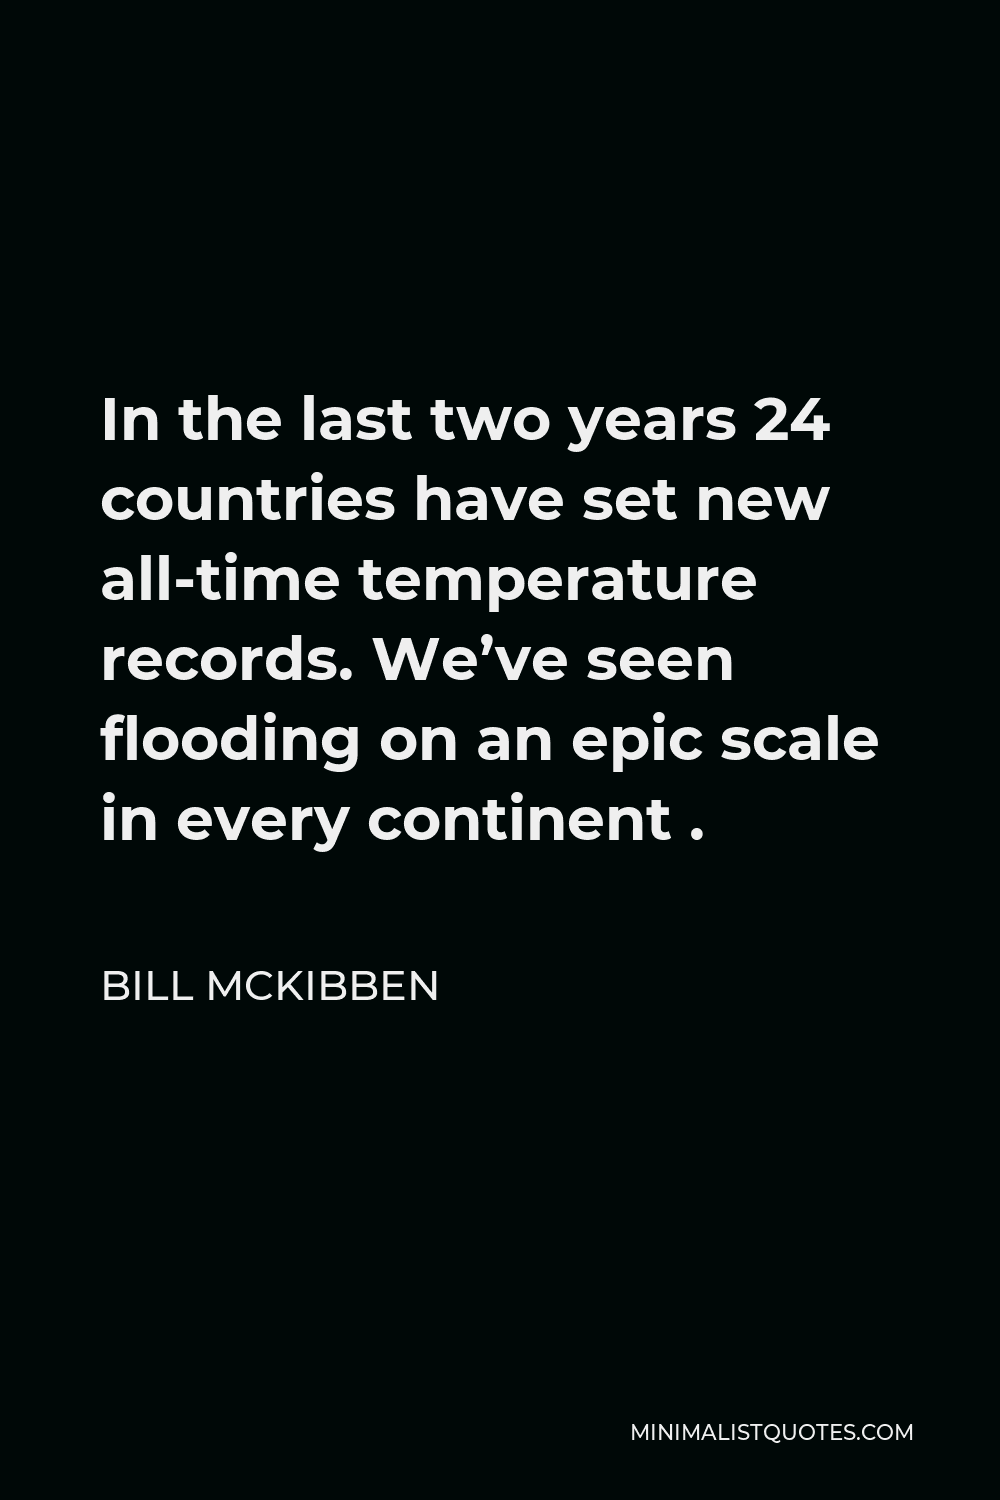 Bill McKibben Quote - In the last two years 24 countries have set new all-time temperature records. We’ve seen flooding on an epic scale in every continent .